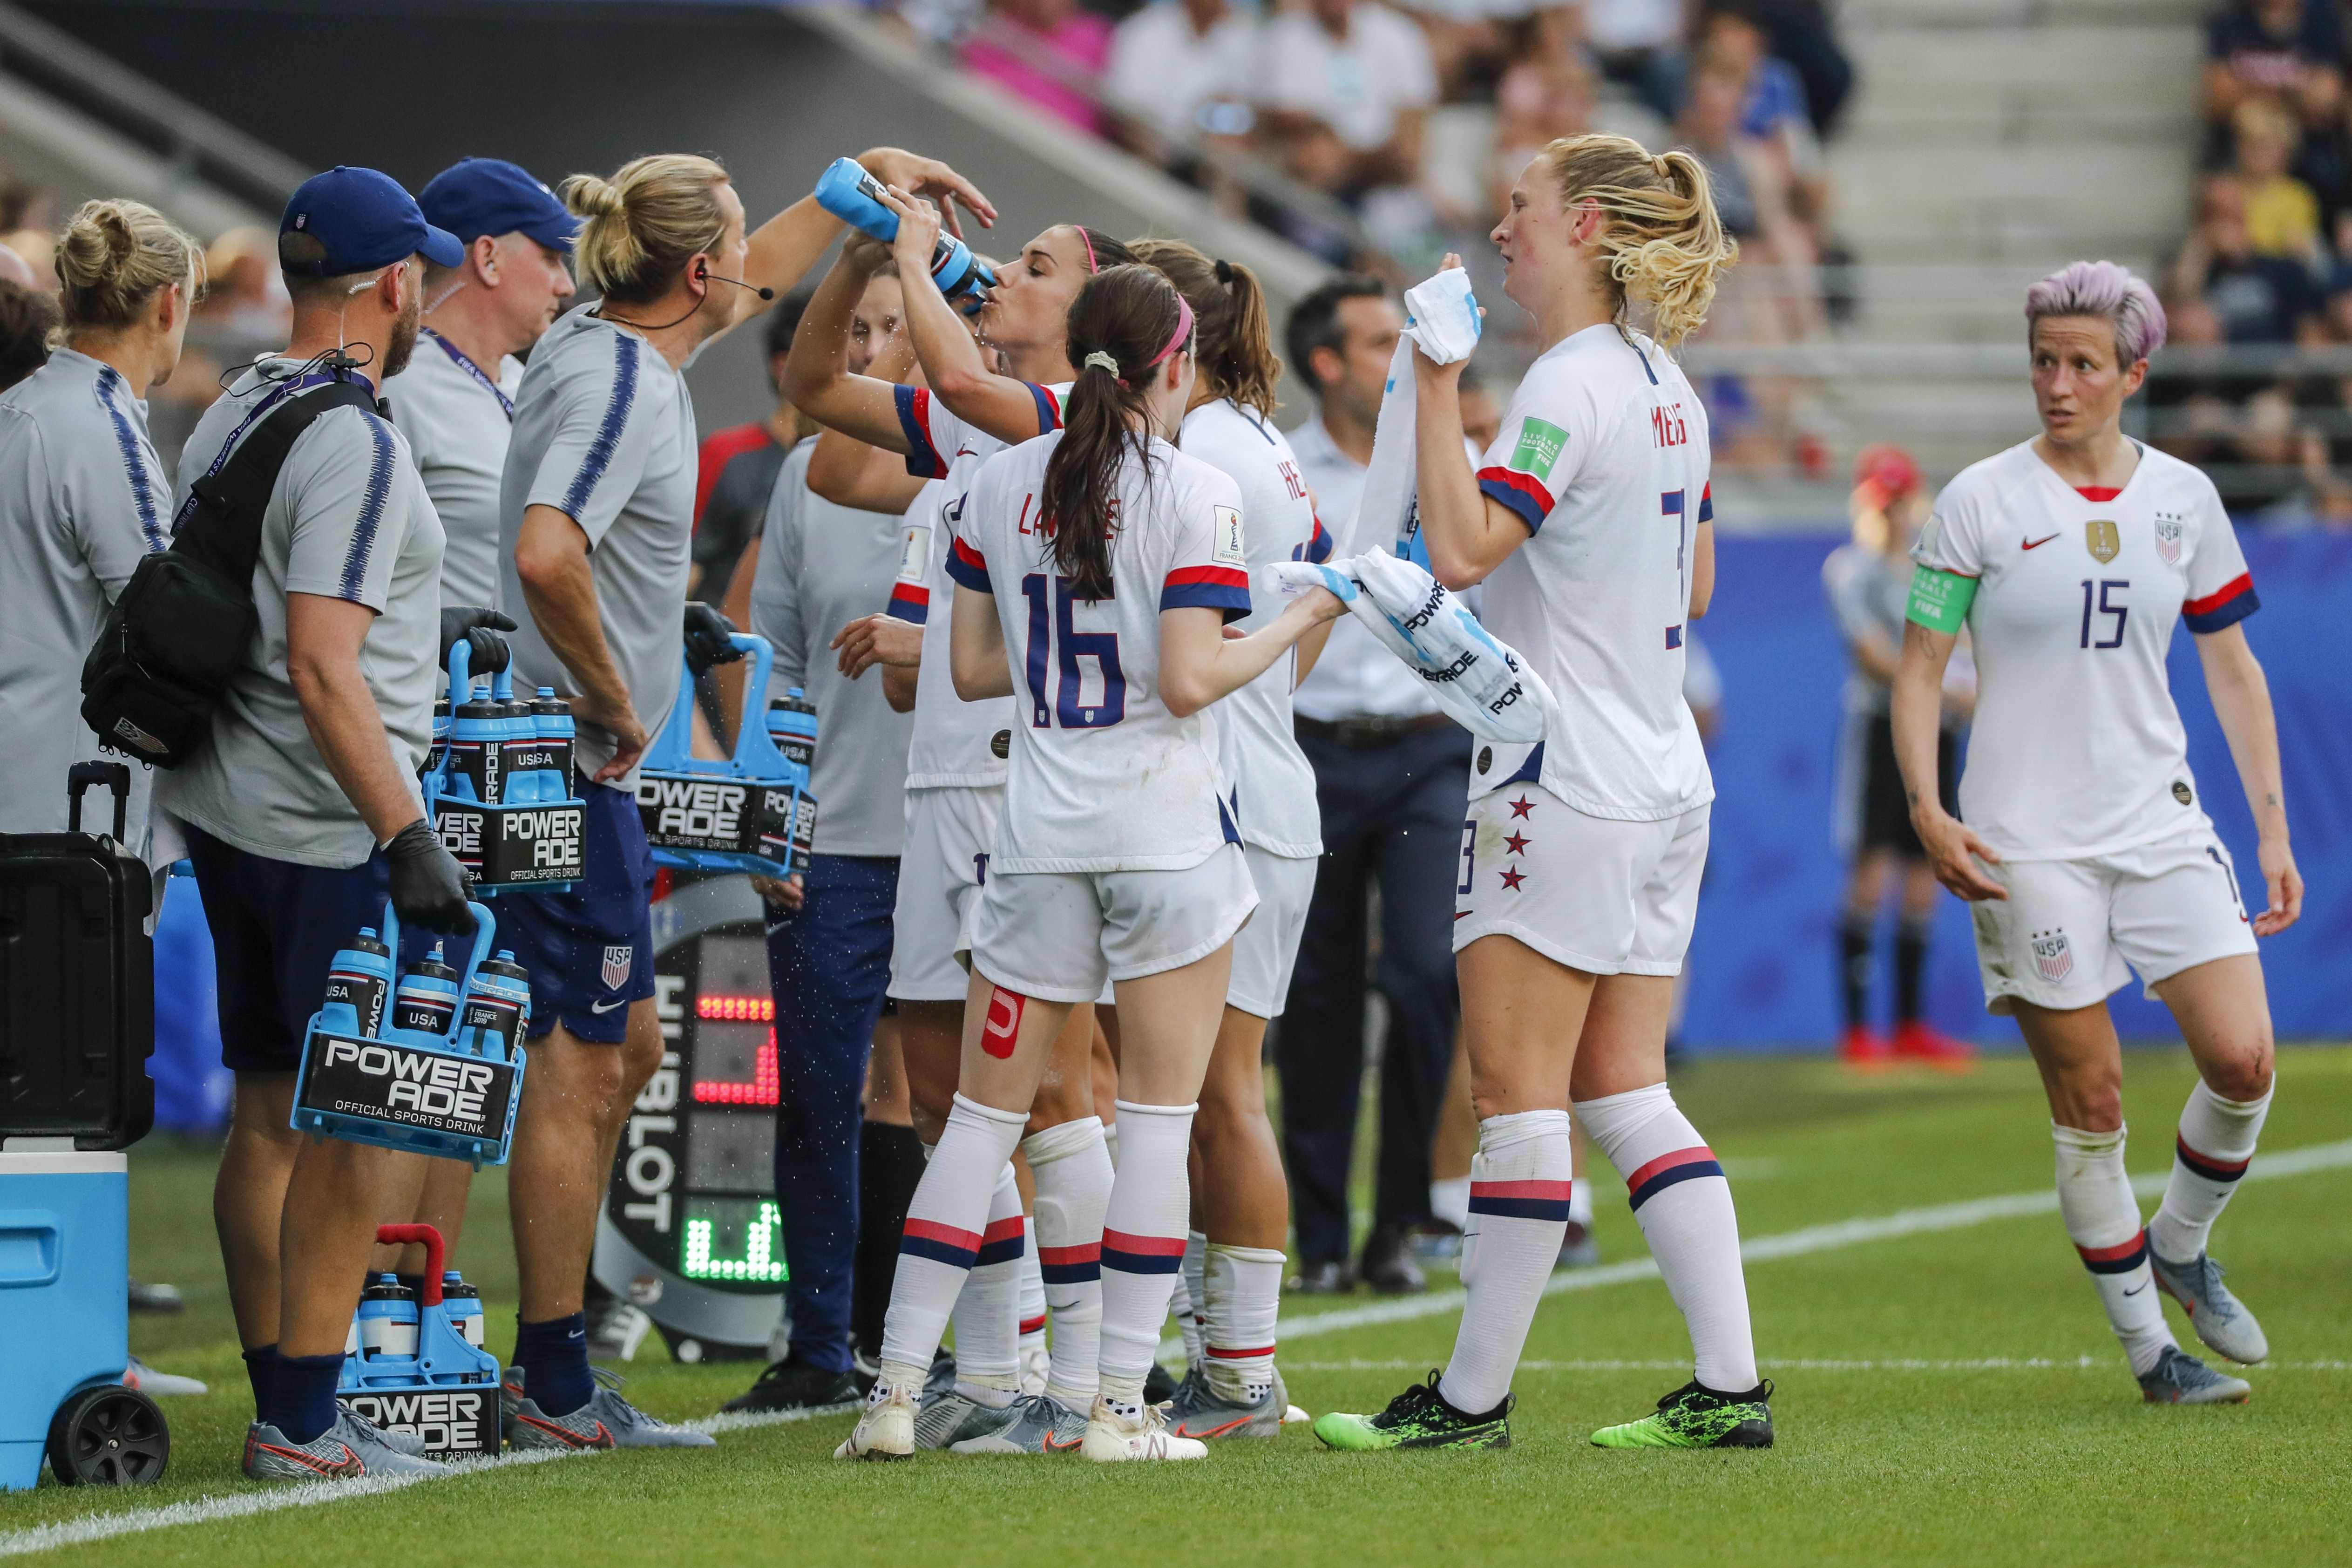  Team USA drinks water and gets wet towels because of the heat wave during the 2019 FIFA Women's World Cup France Round Of 16 match between Spain and USA at Stade Auguste Delaune on June 24.